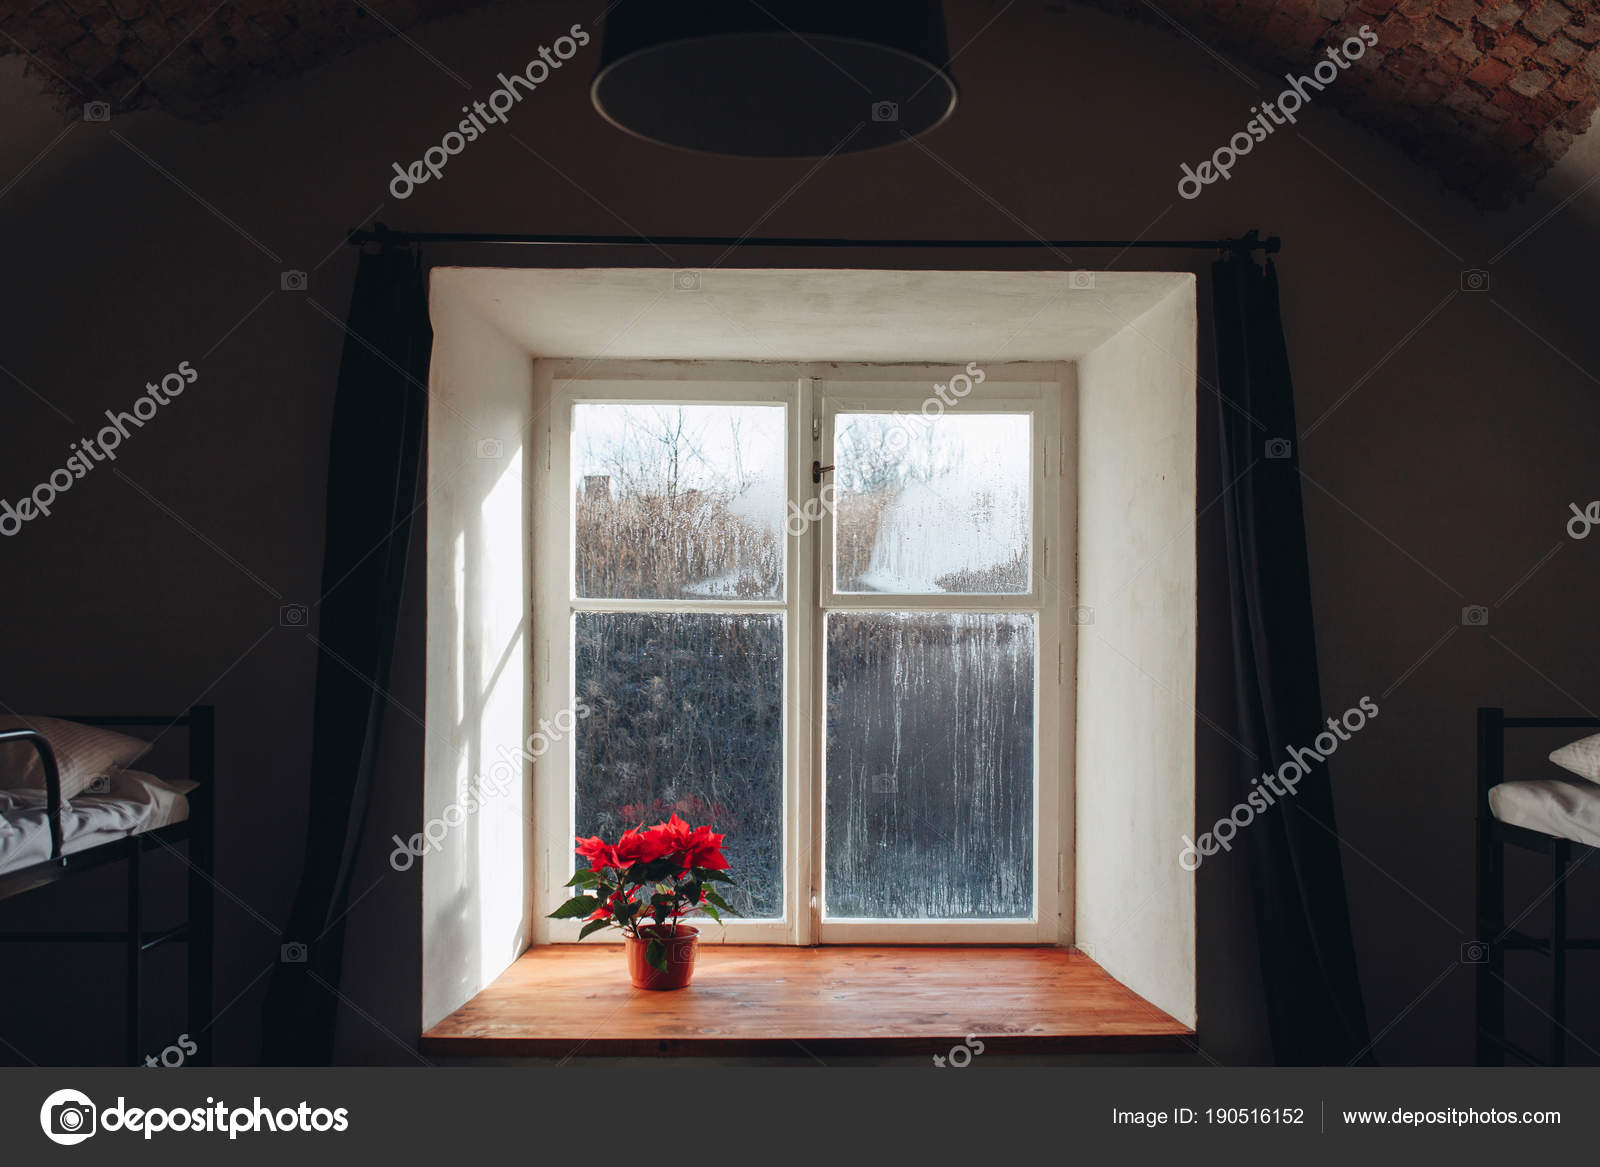 Building Wall With Window And Windowsill With Big Flower